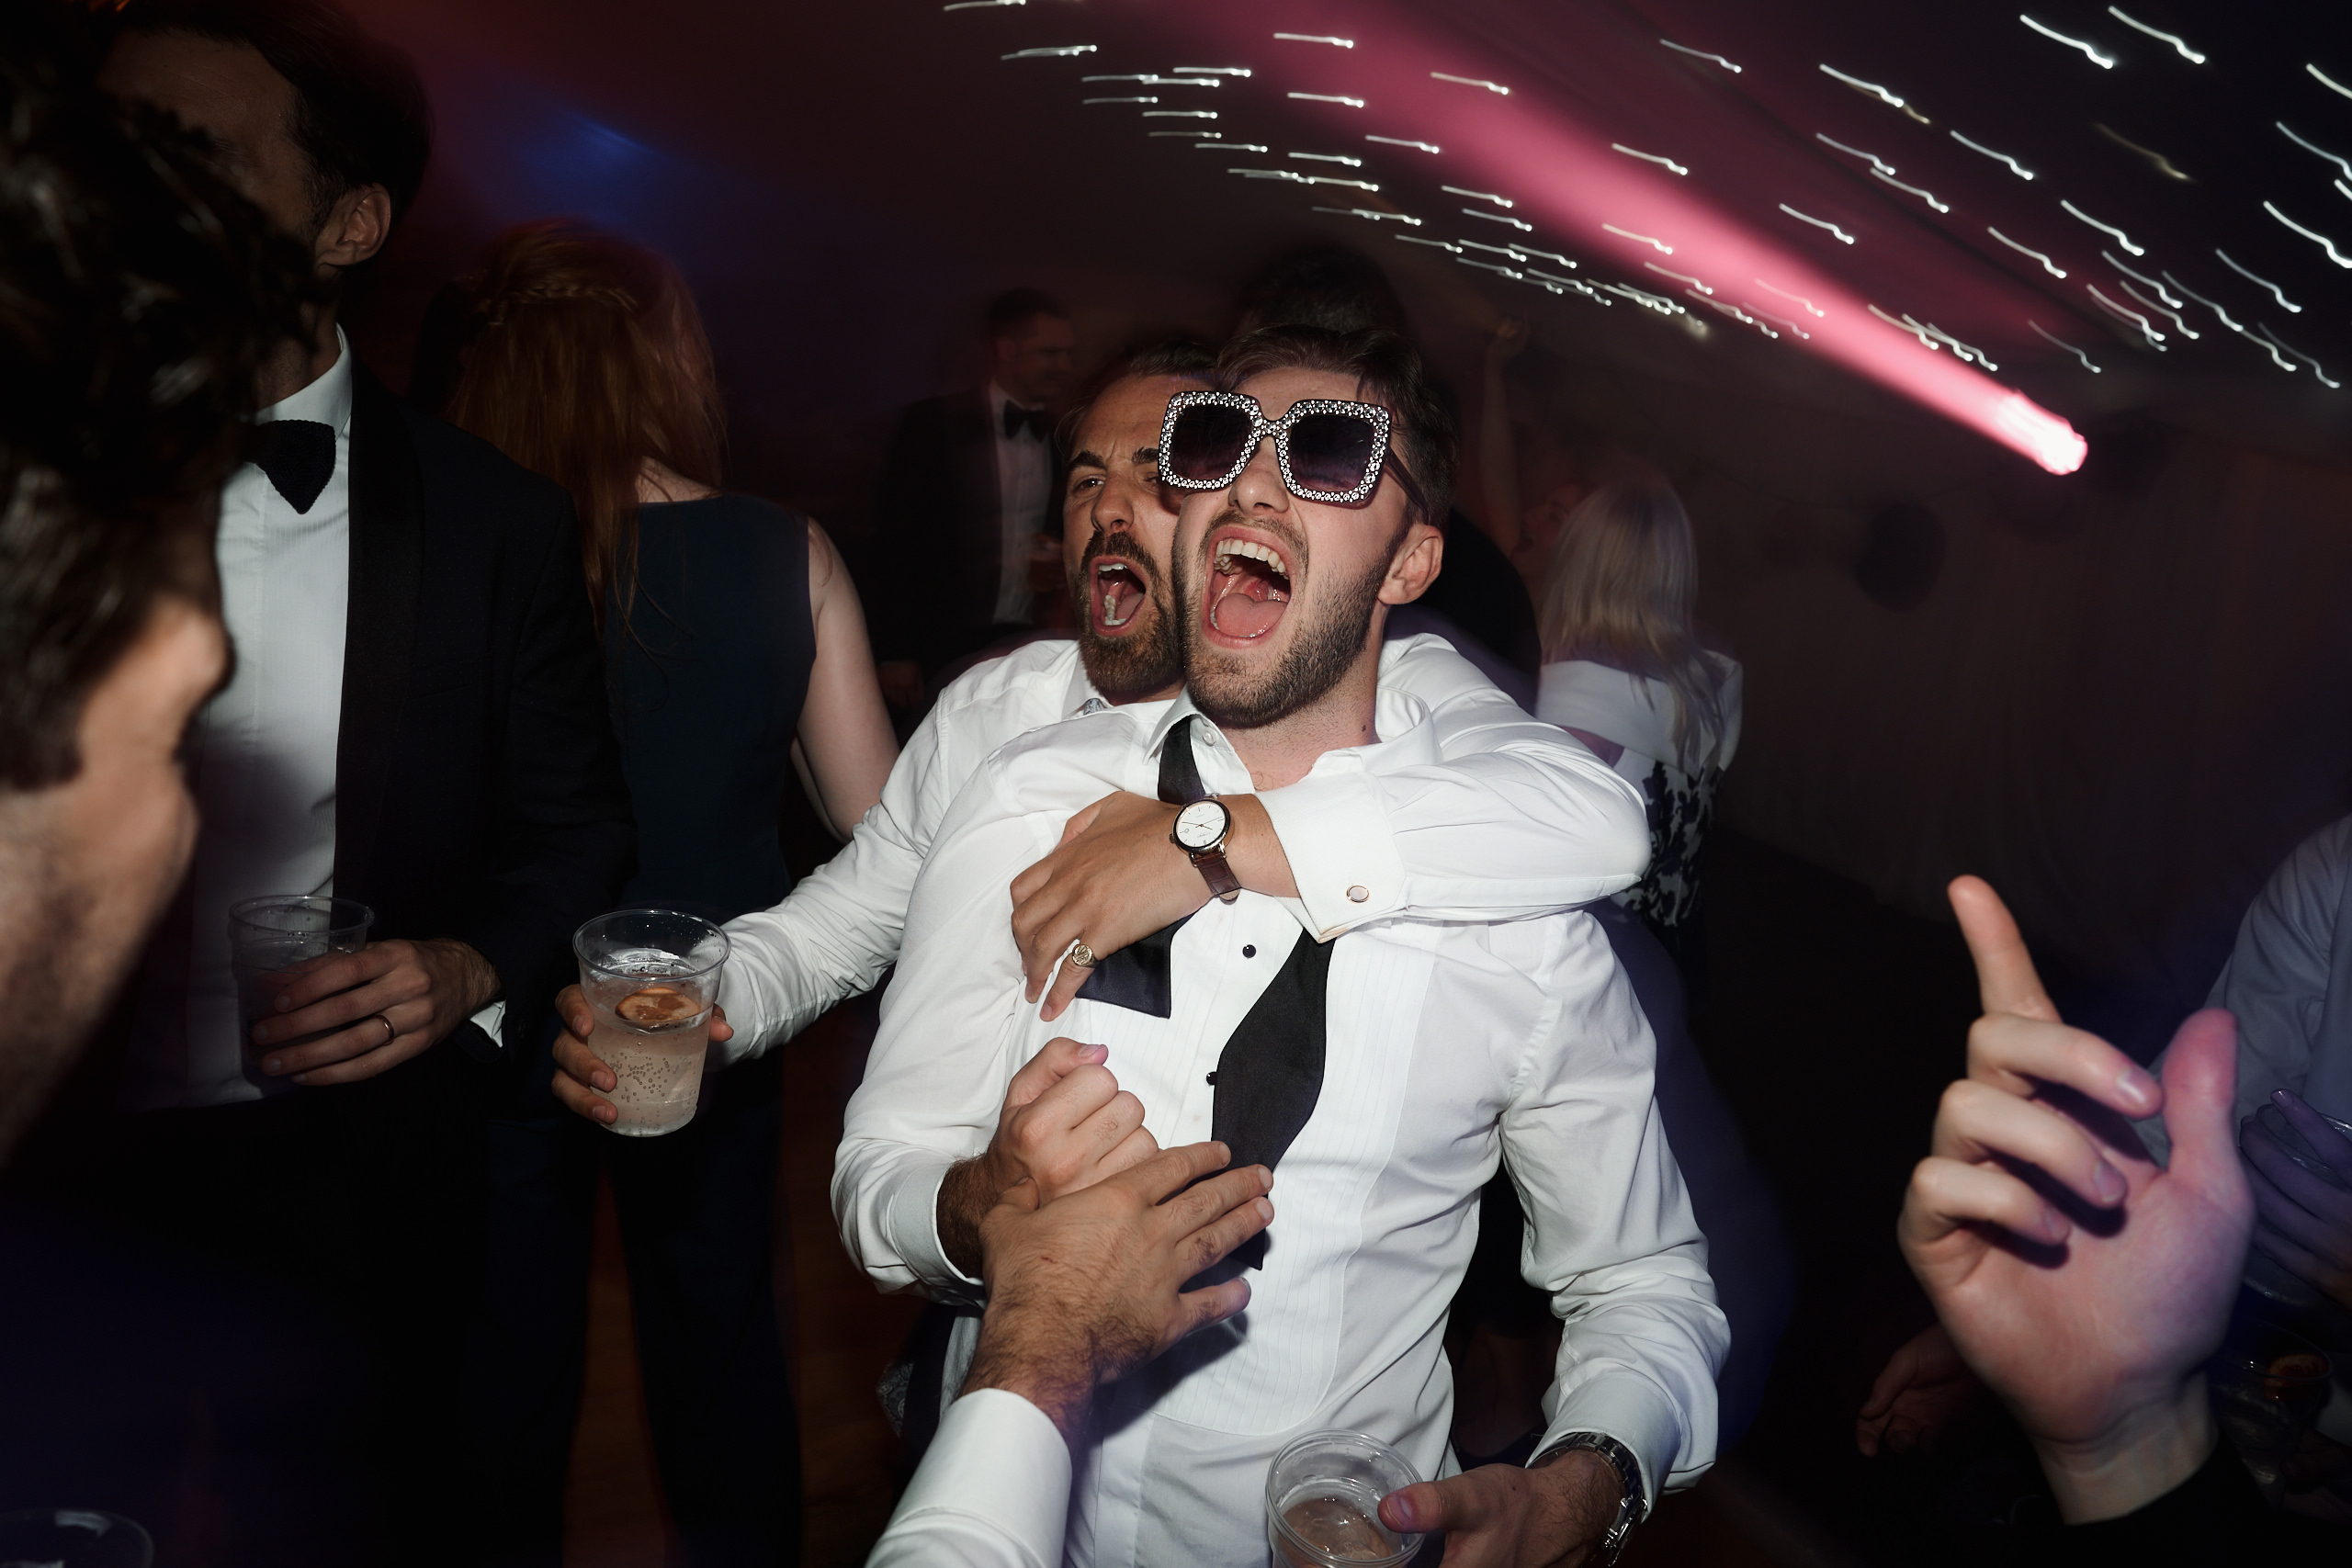 A guy with shades is enjoying himself at a party.